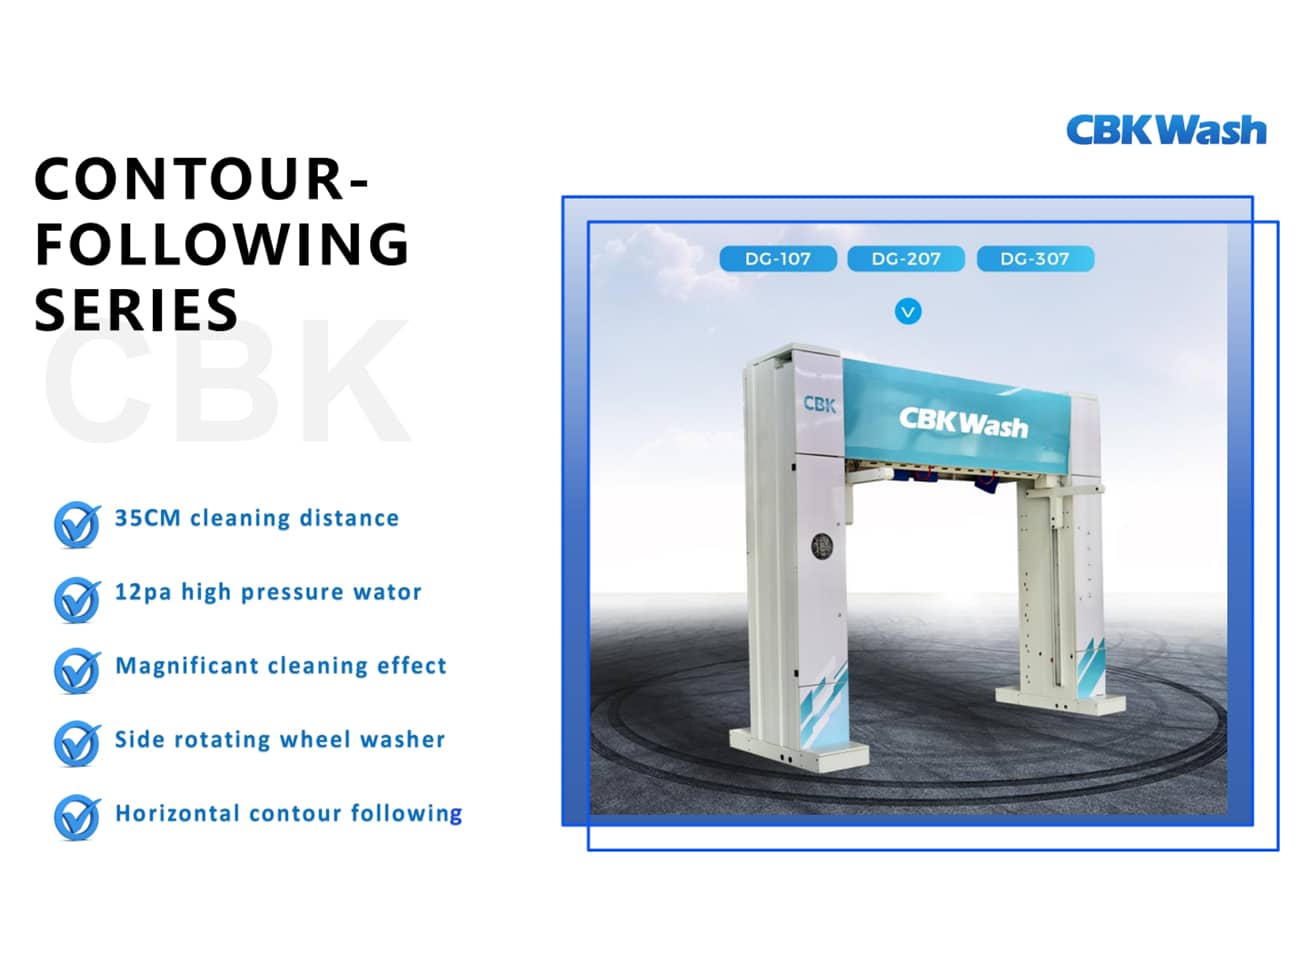 Introducing the Contour Following Series: Next-Level Car Washing Machines for Exceptional Cleaning Performance